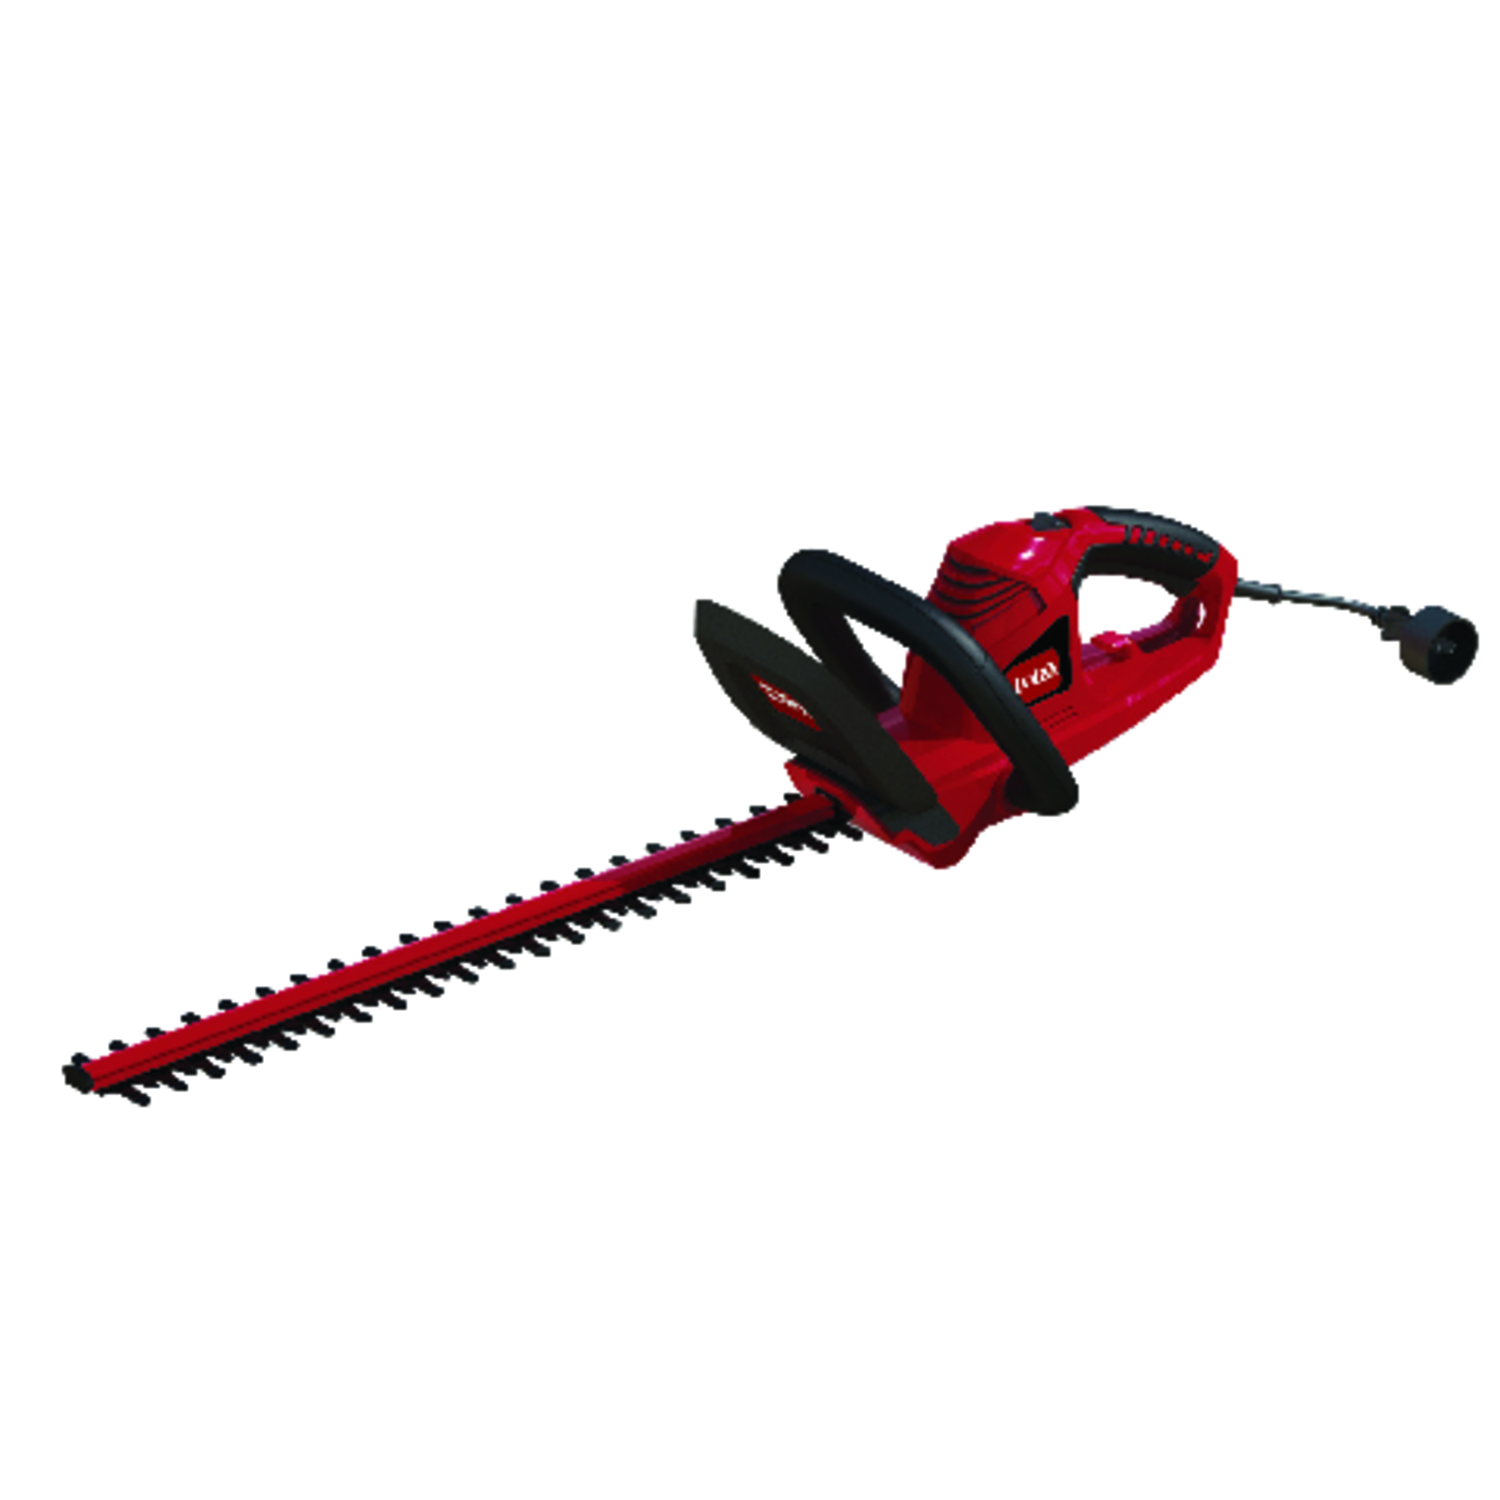 corded hedge cutter